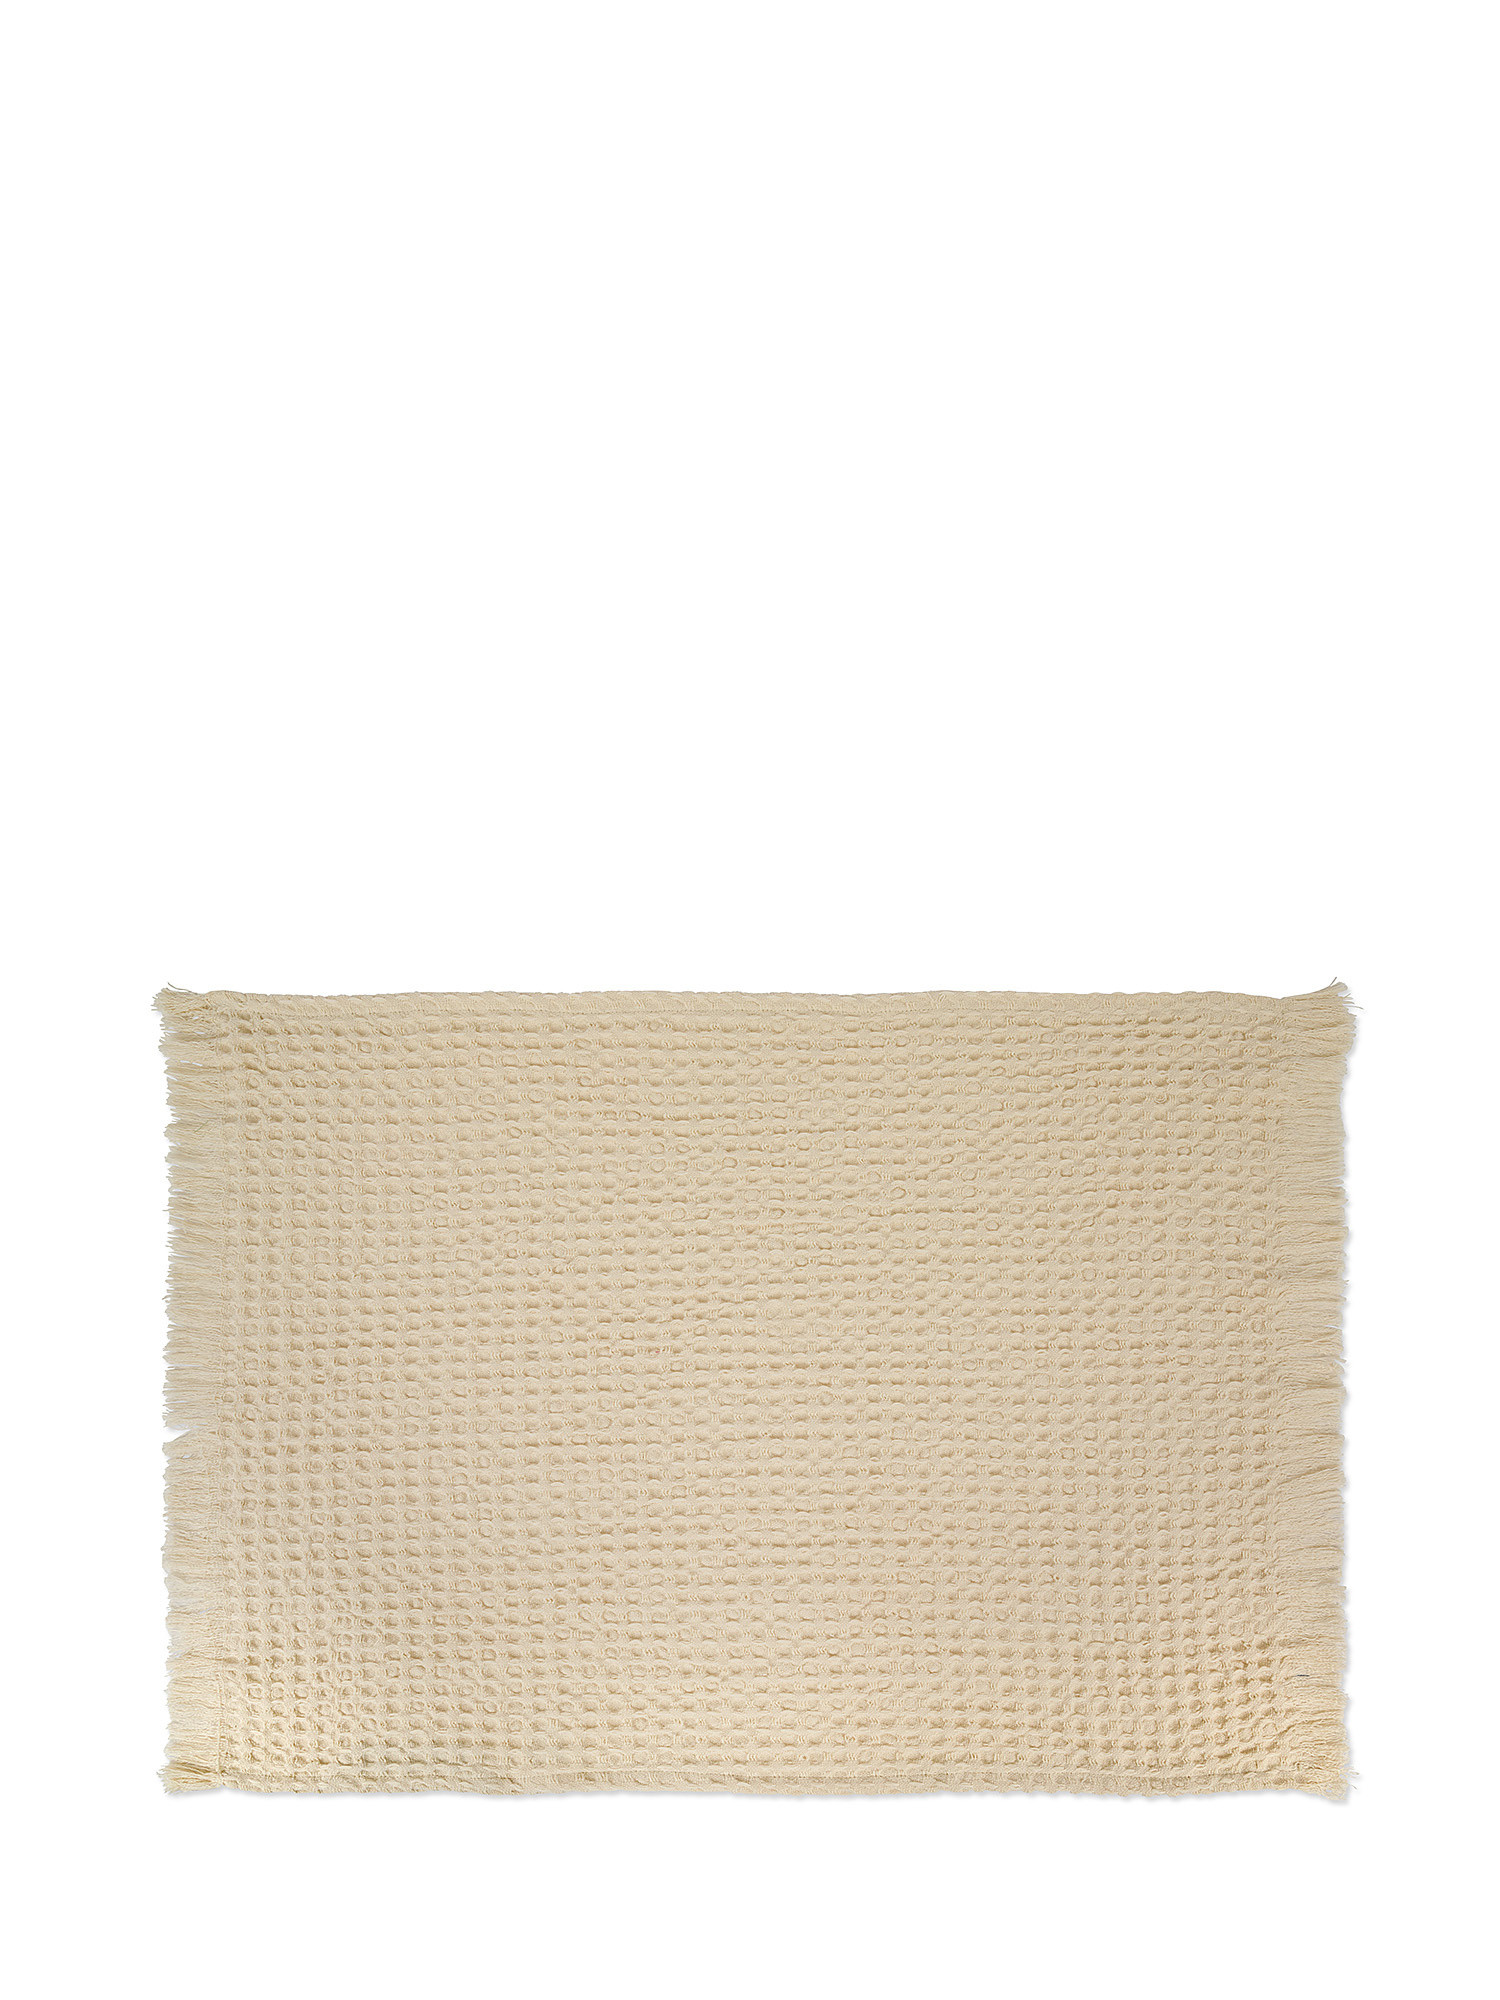 Thermae honeycomb cotton towel, Beige, large image number 1